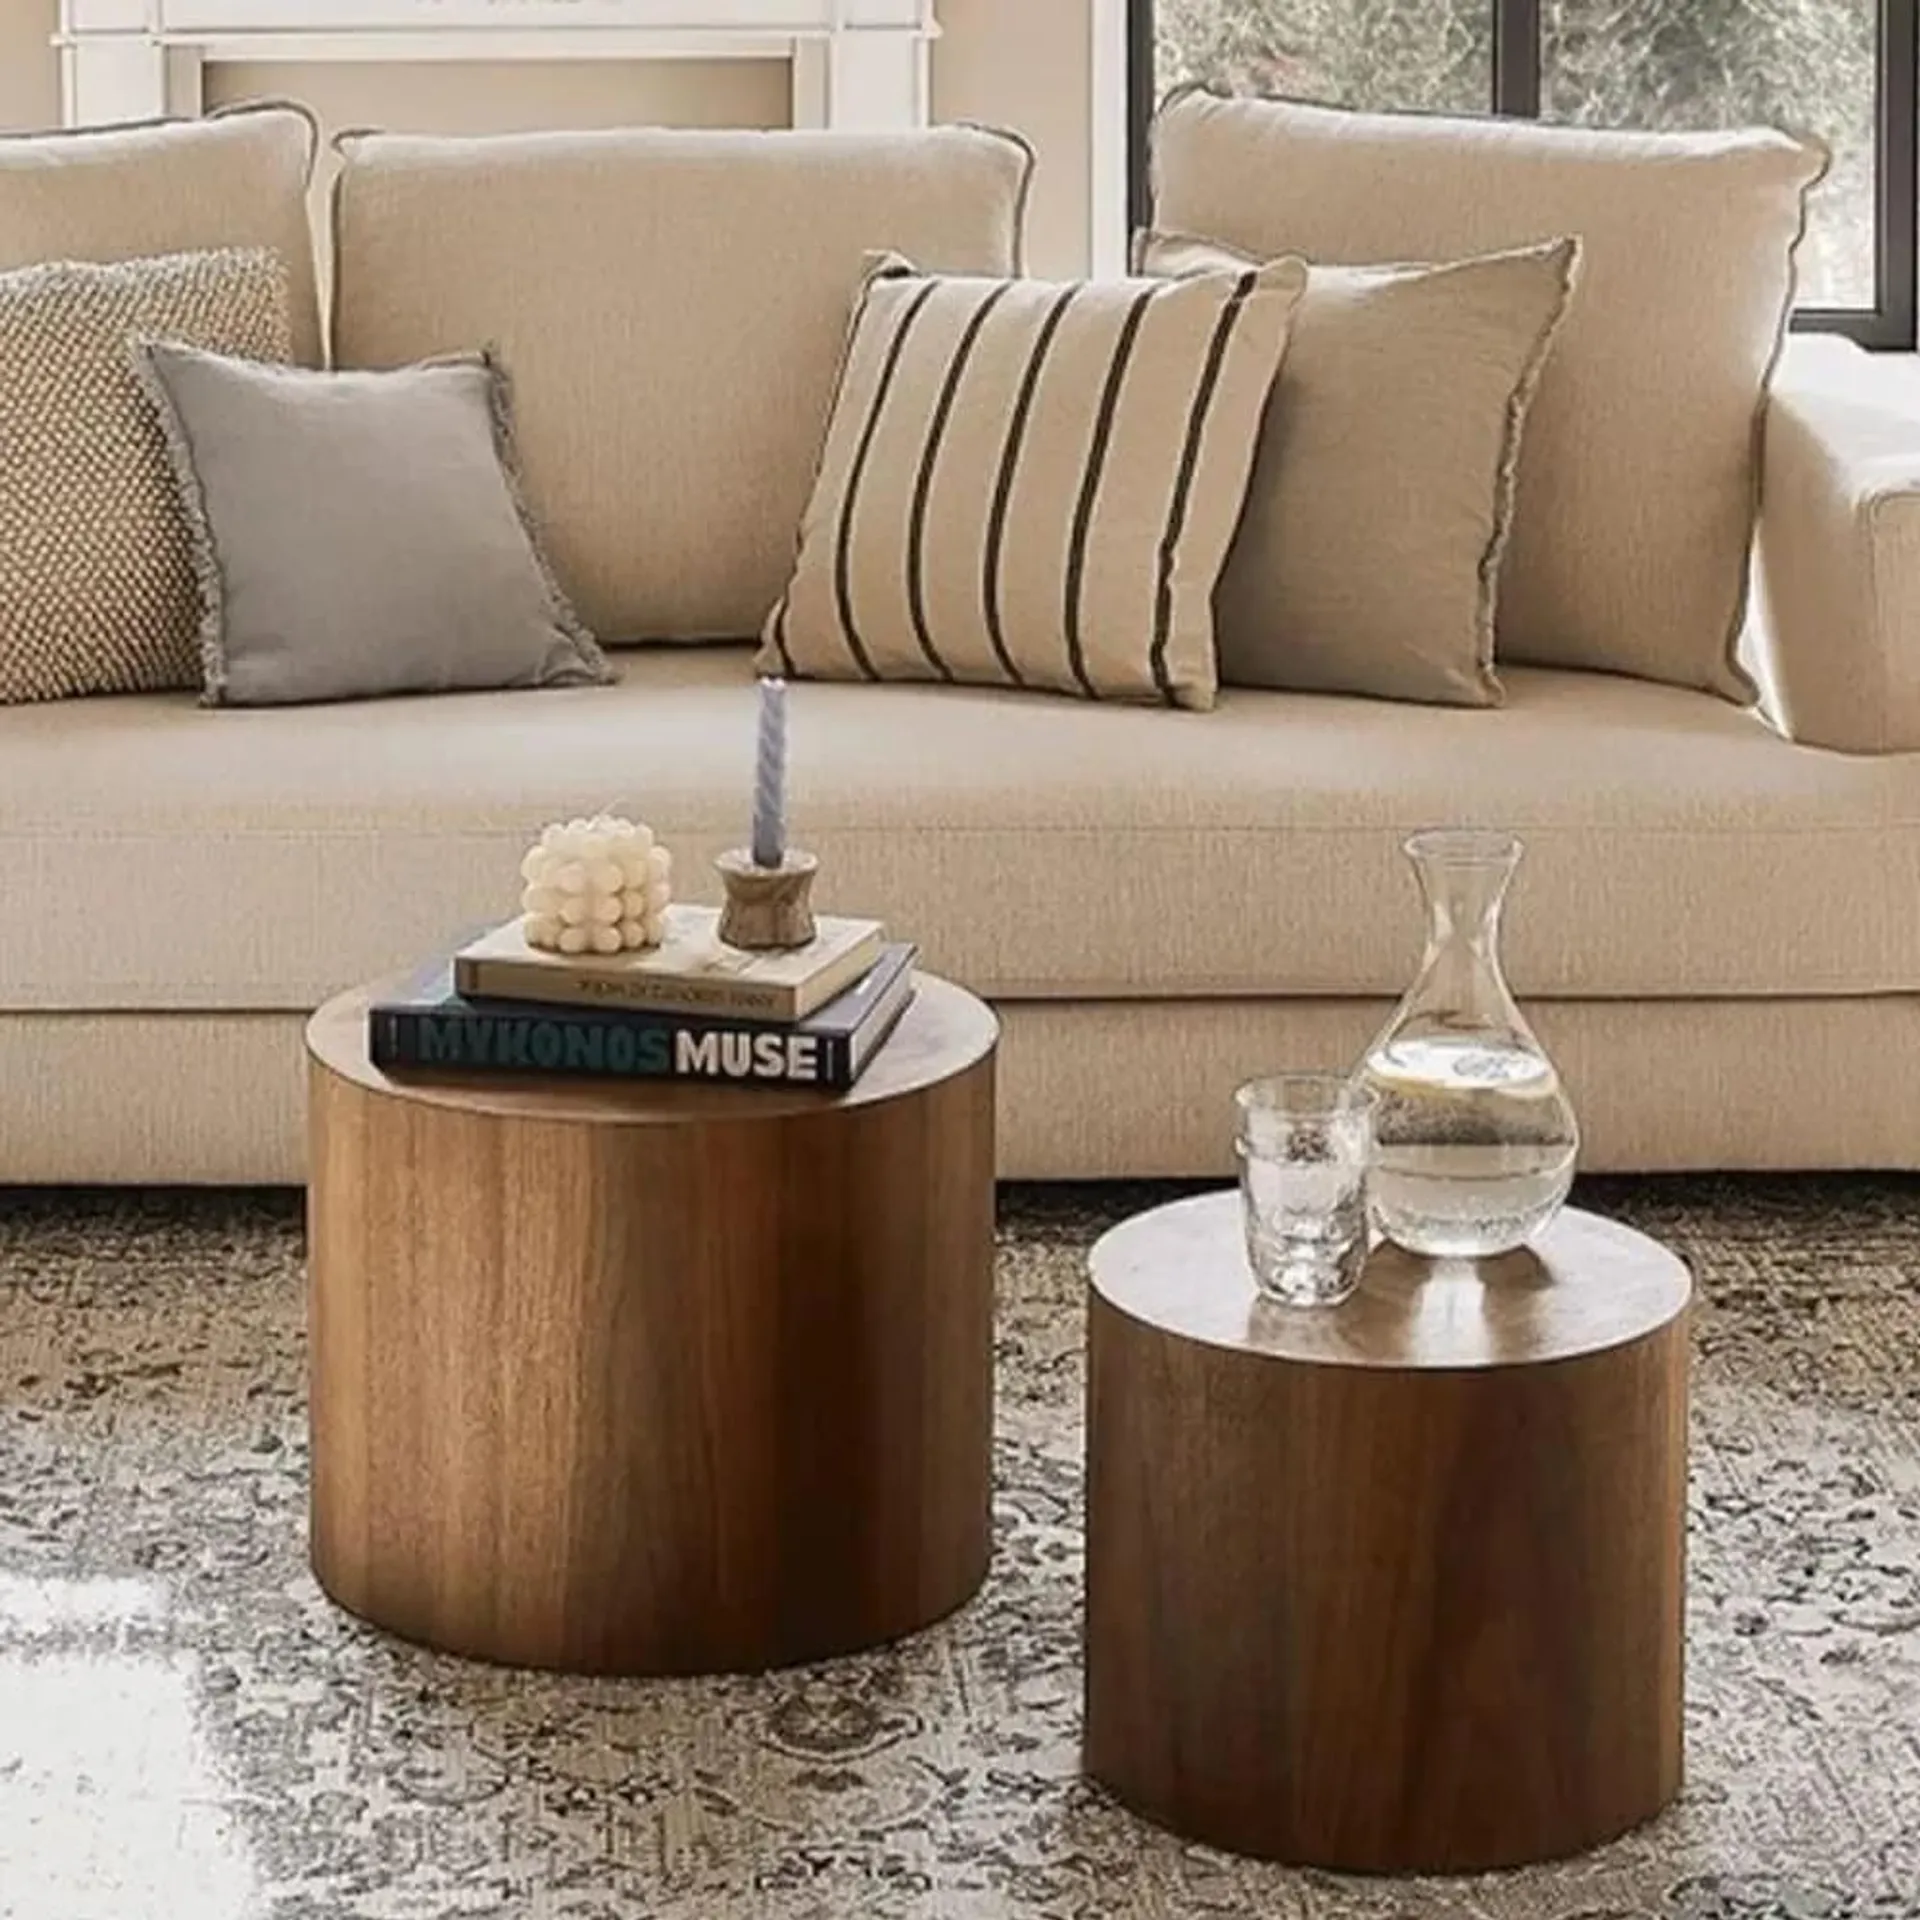 Nesting Coffee Table Set of 2, Walnut Round Wooden Coffee Tables Modern Circle Table for Small Space Living Room